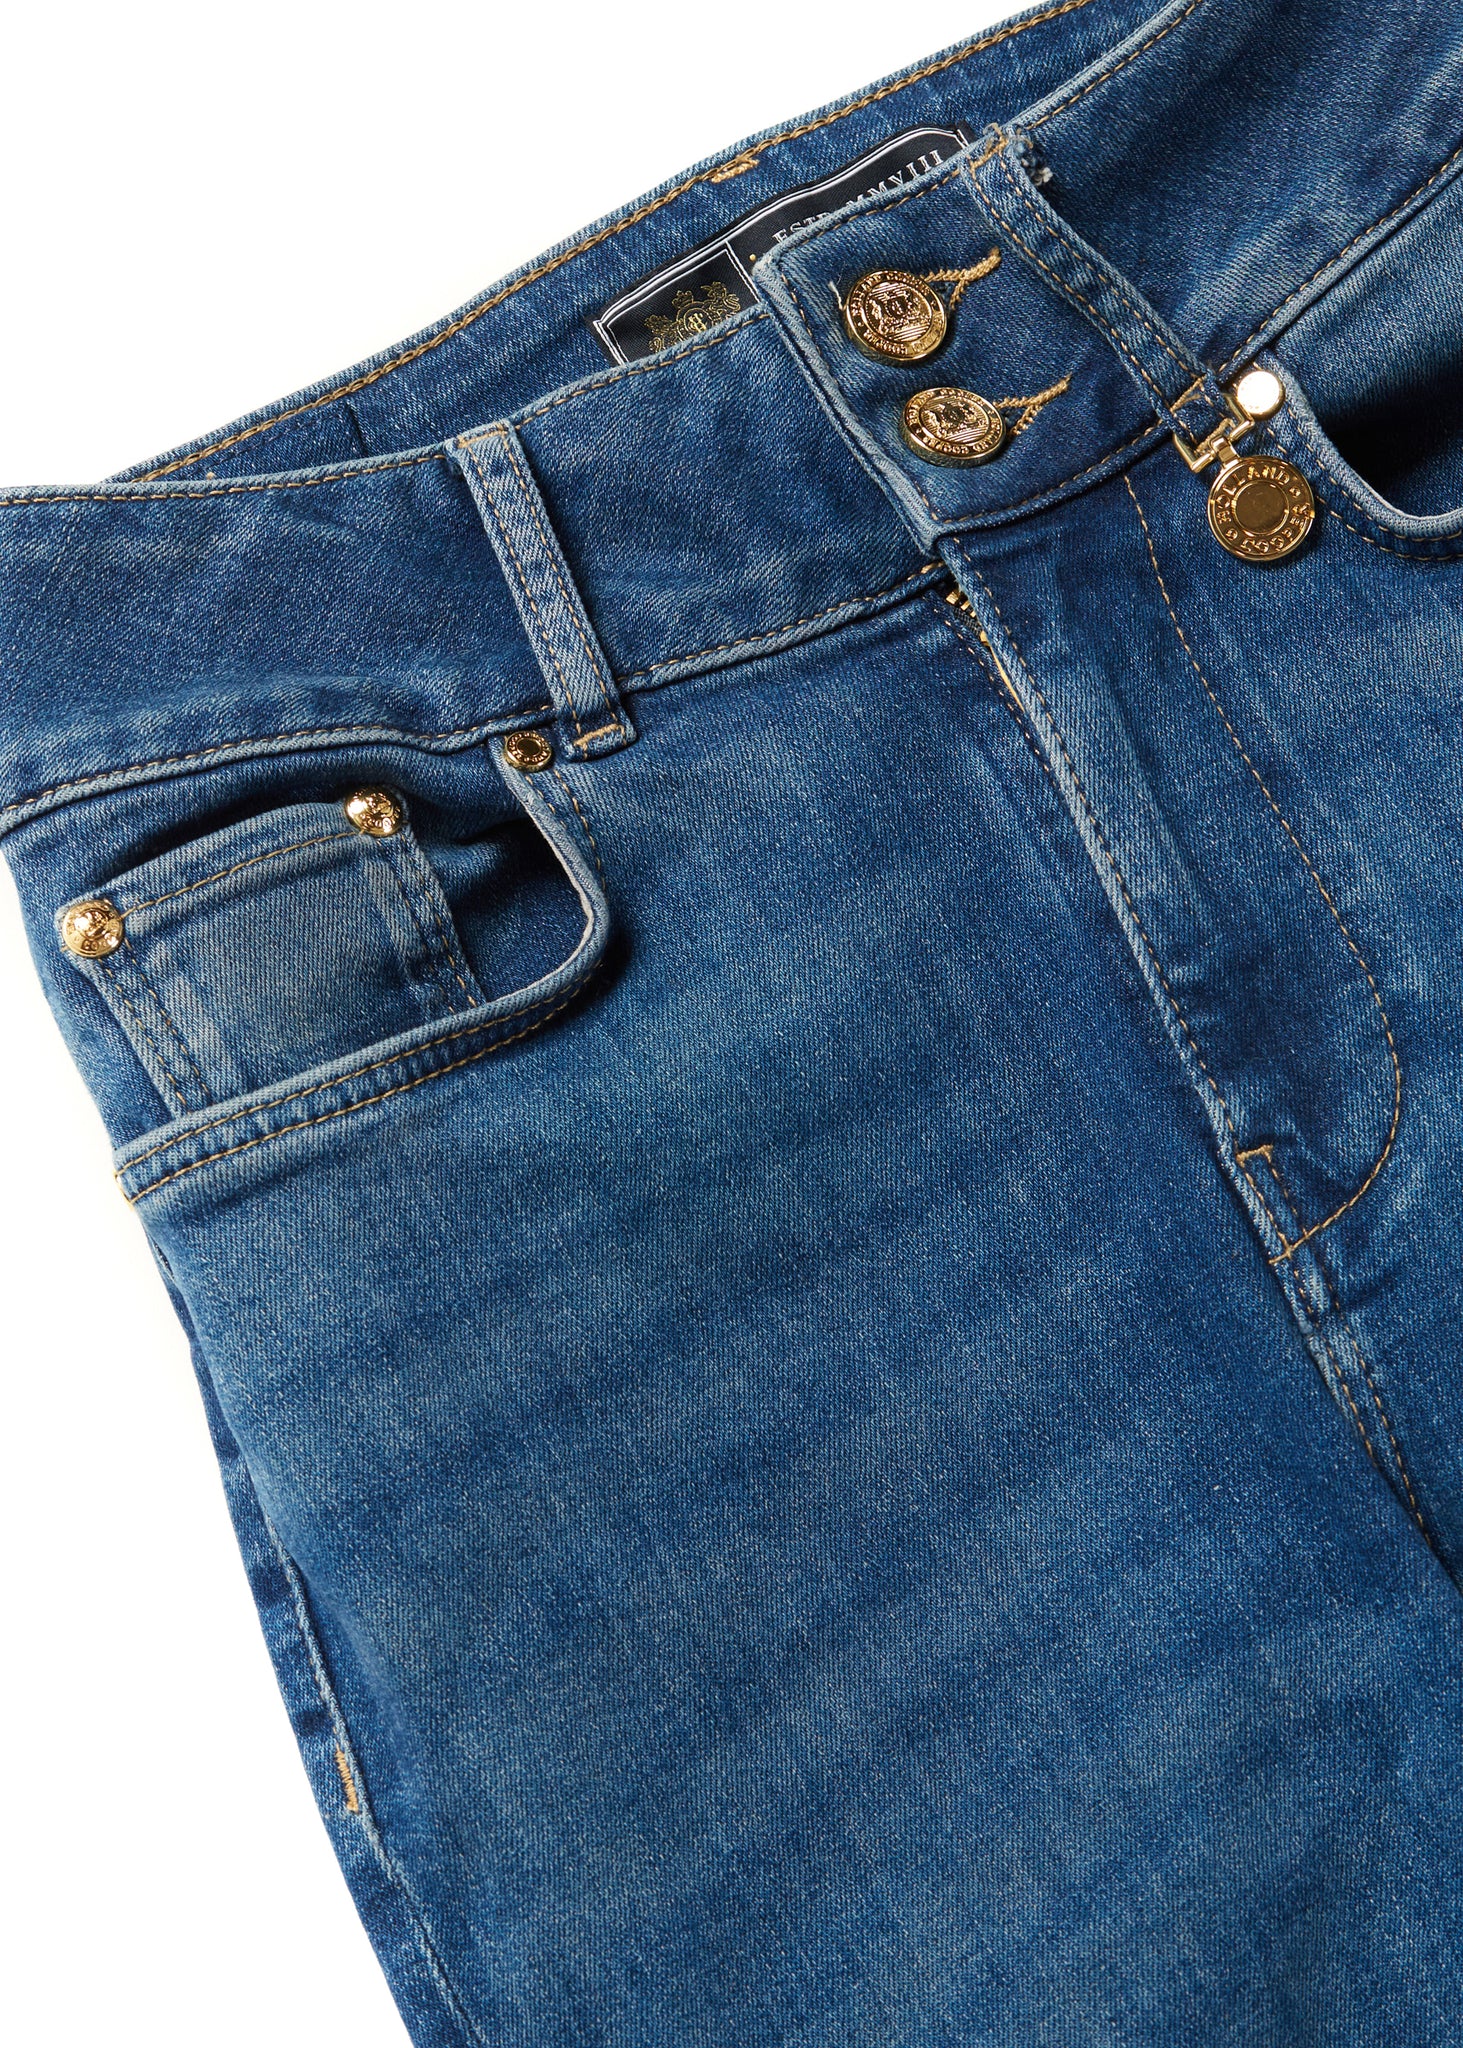 front pocket detail on womens high rise blue denim flared jean with centre front zip fly fastening with two open pockets at the front and back and gold hardware on back waistband